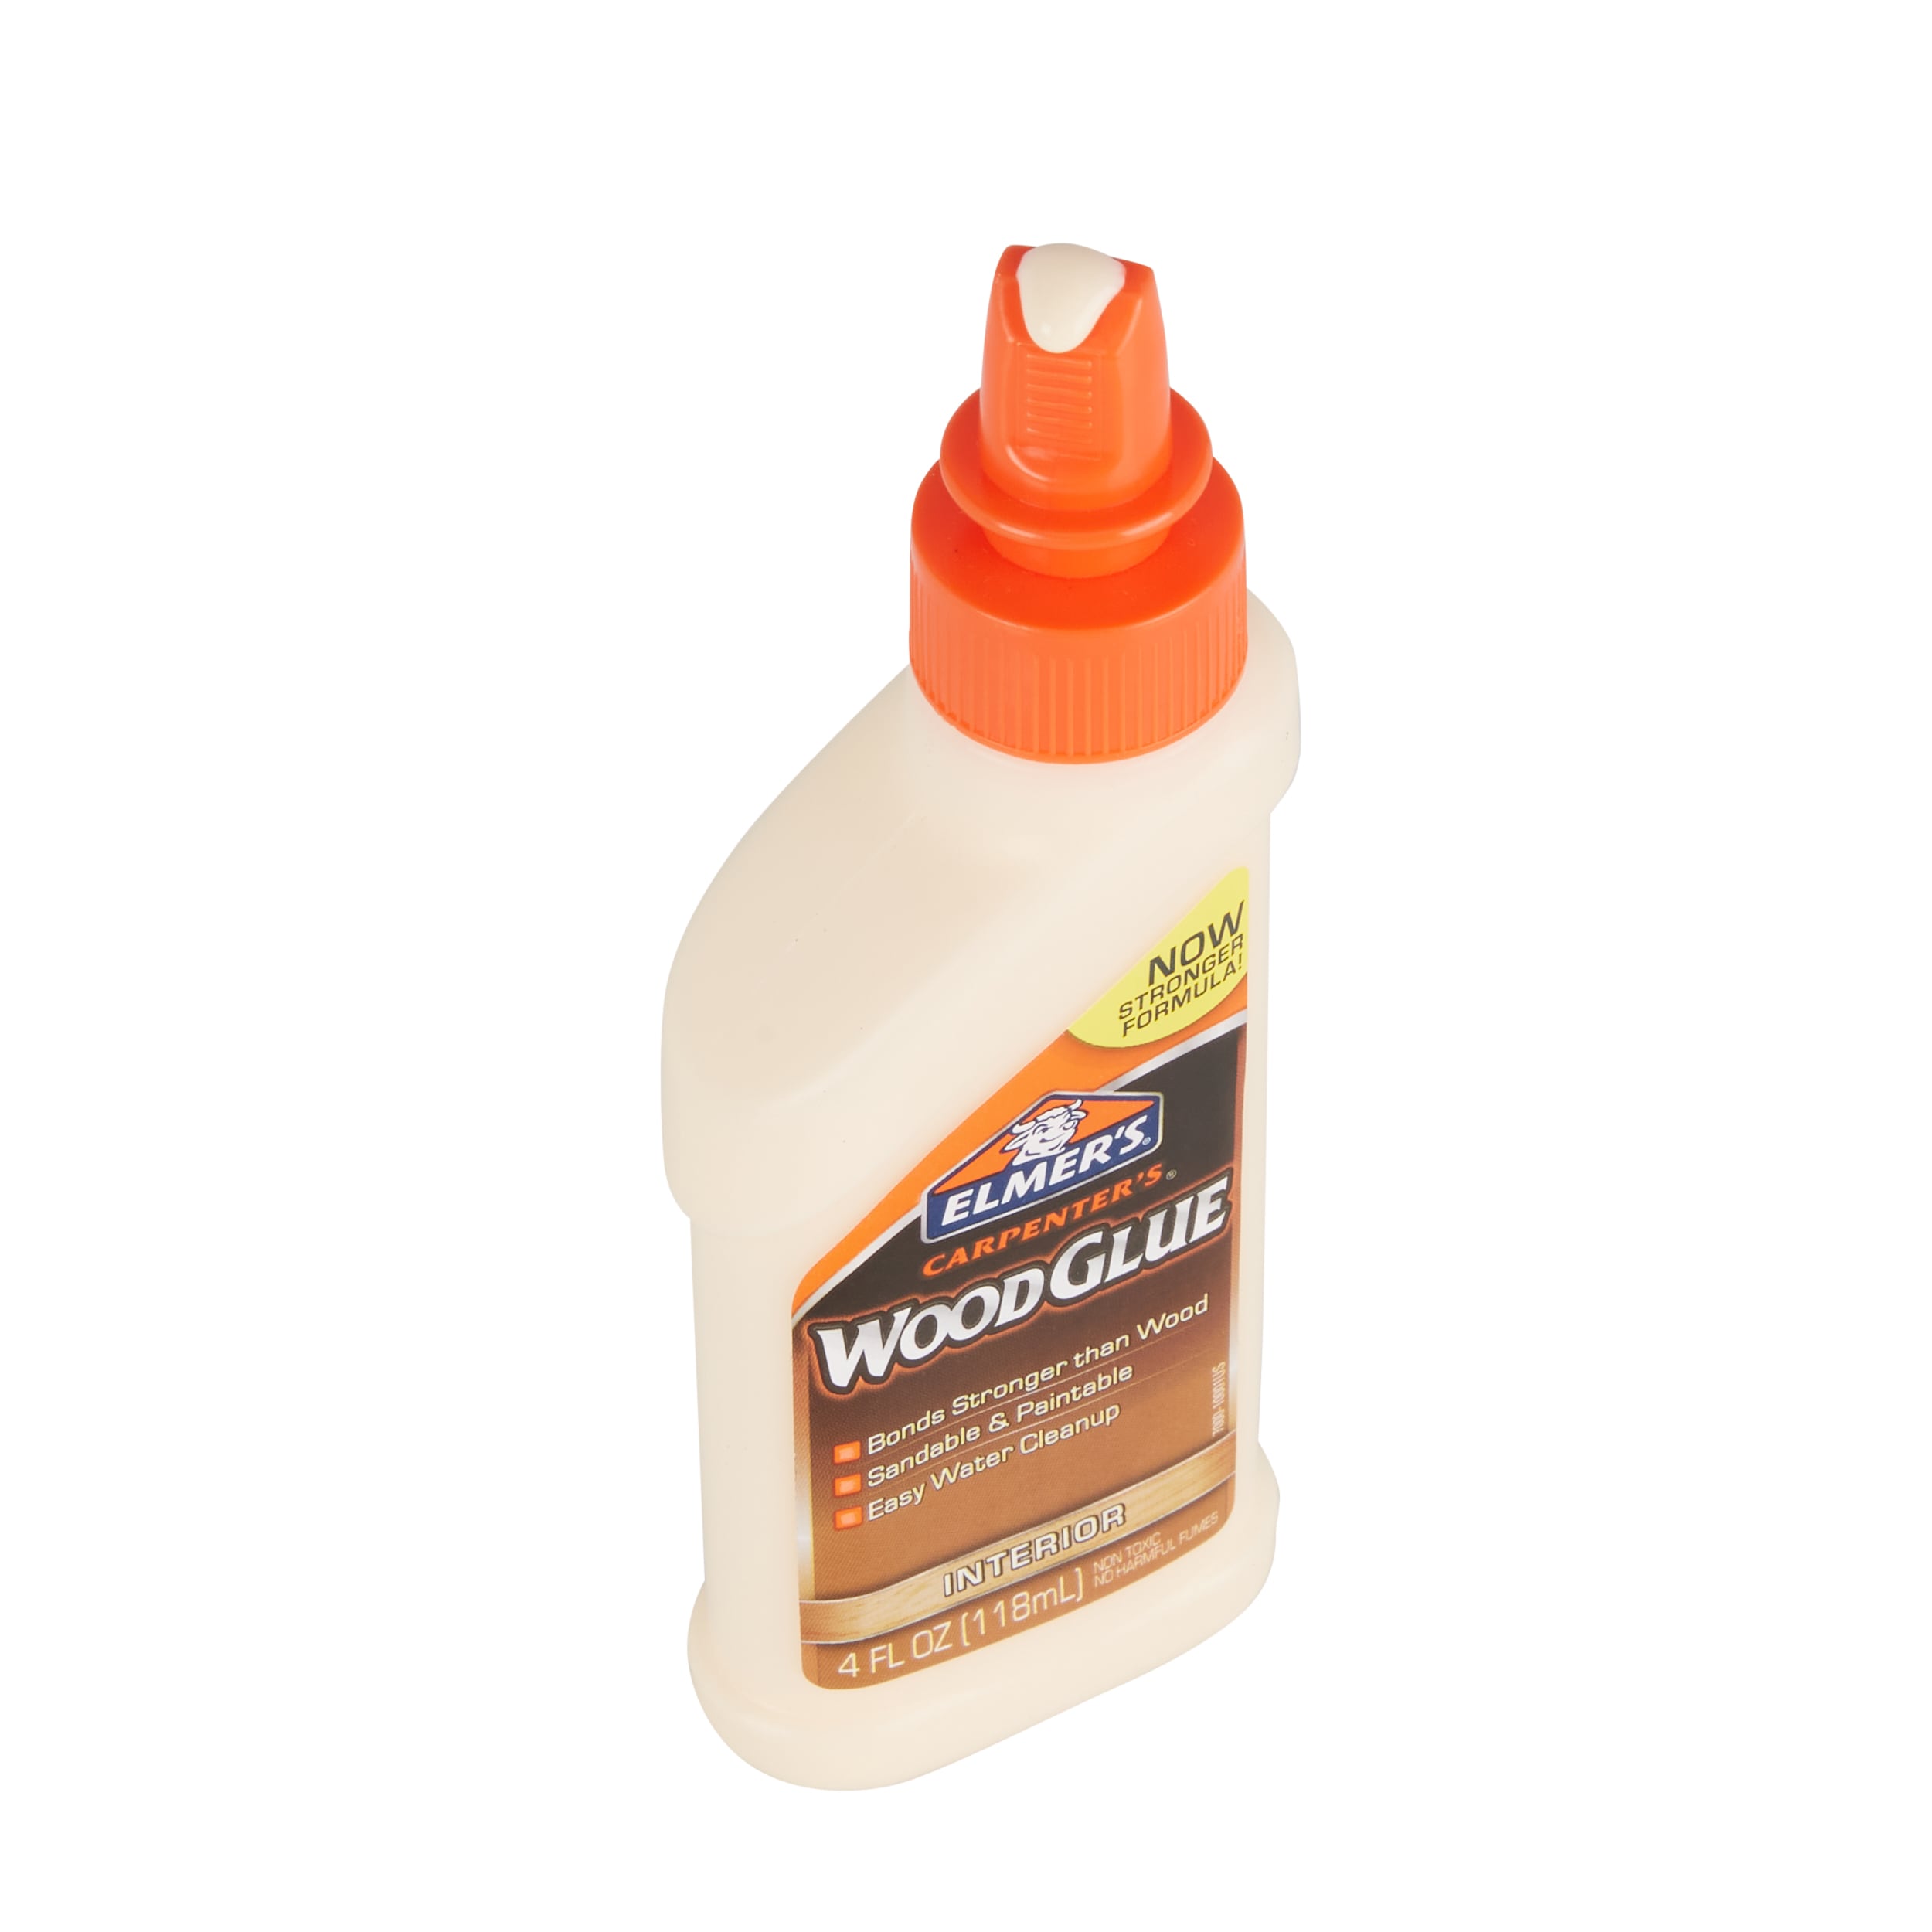 ELMER'S Carpenter's wood glue Off-white, Quick Dry Interior Wood Adhesive  (Actual Net Contents: 4-fl oz) in the Wood Adhesive department at